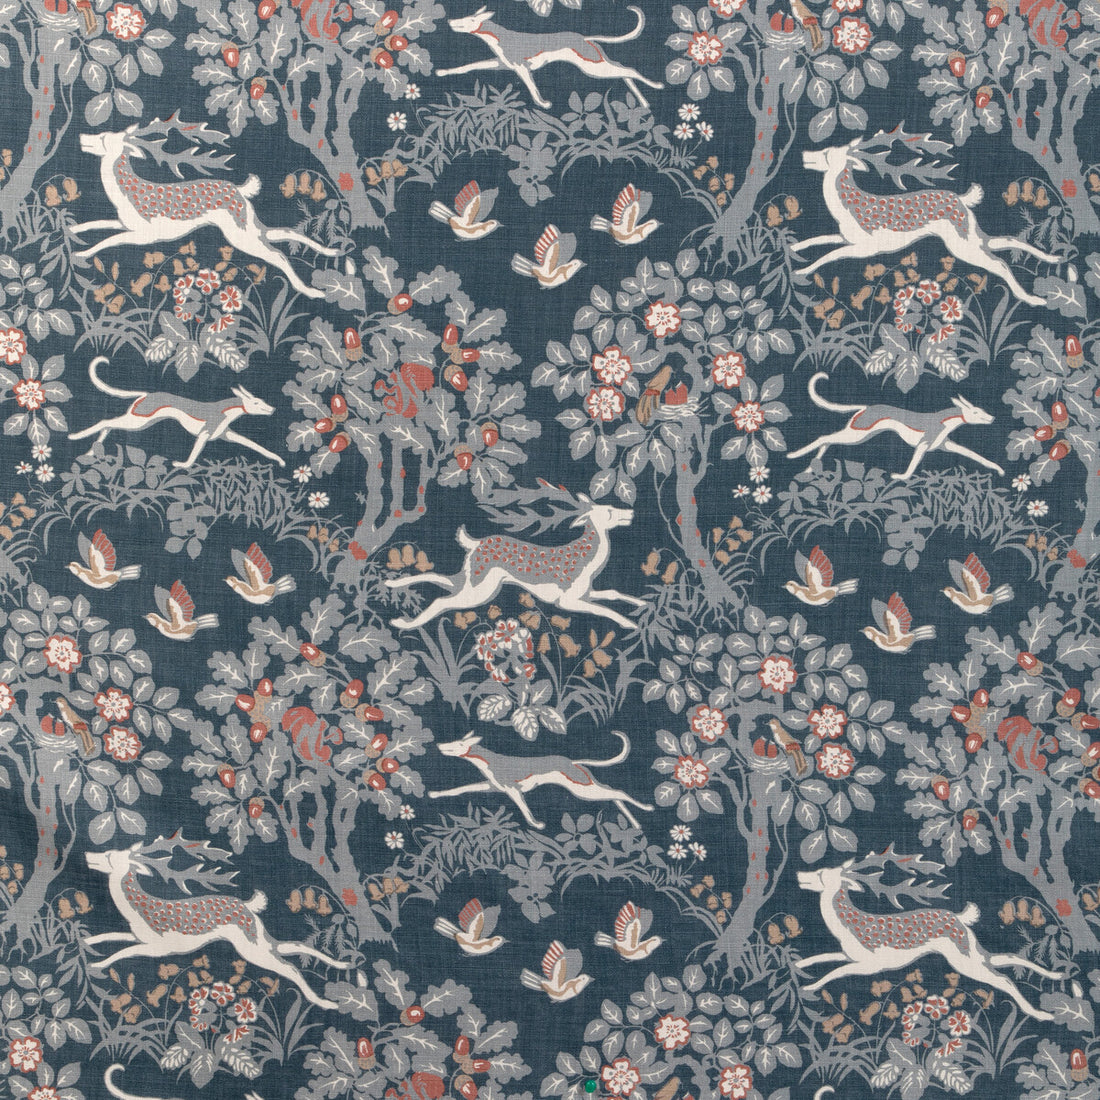 Mille Fleur Print fabric in denim color - pattern 2023122.519.0 - by Lee Jofa in the Lee Jofa 200 collection